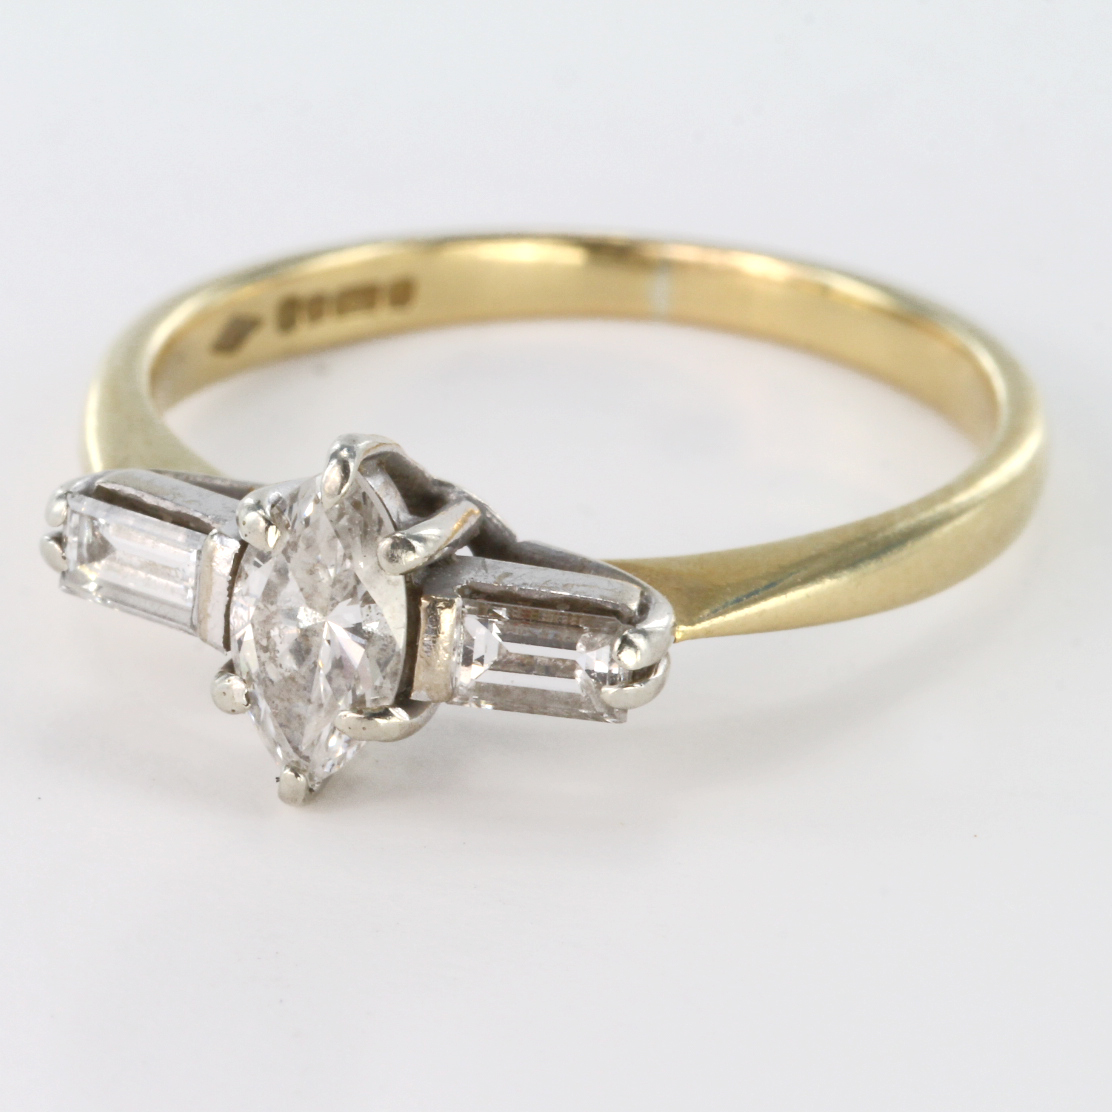 18ct gold ring set with central Marquis cut diamond stone plus two baguette cut diamonds either